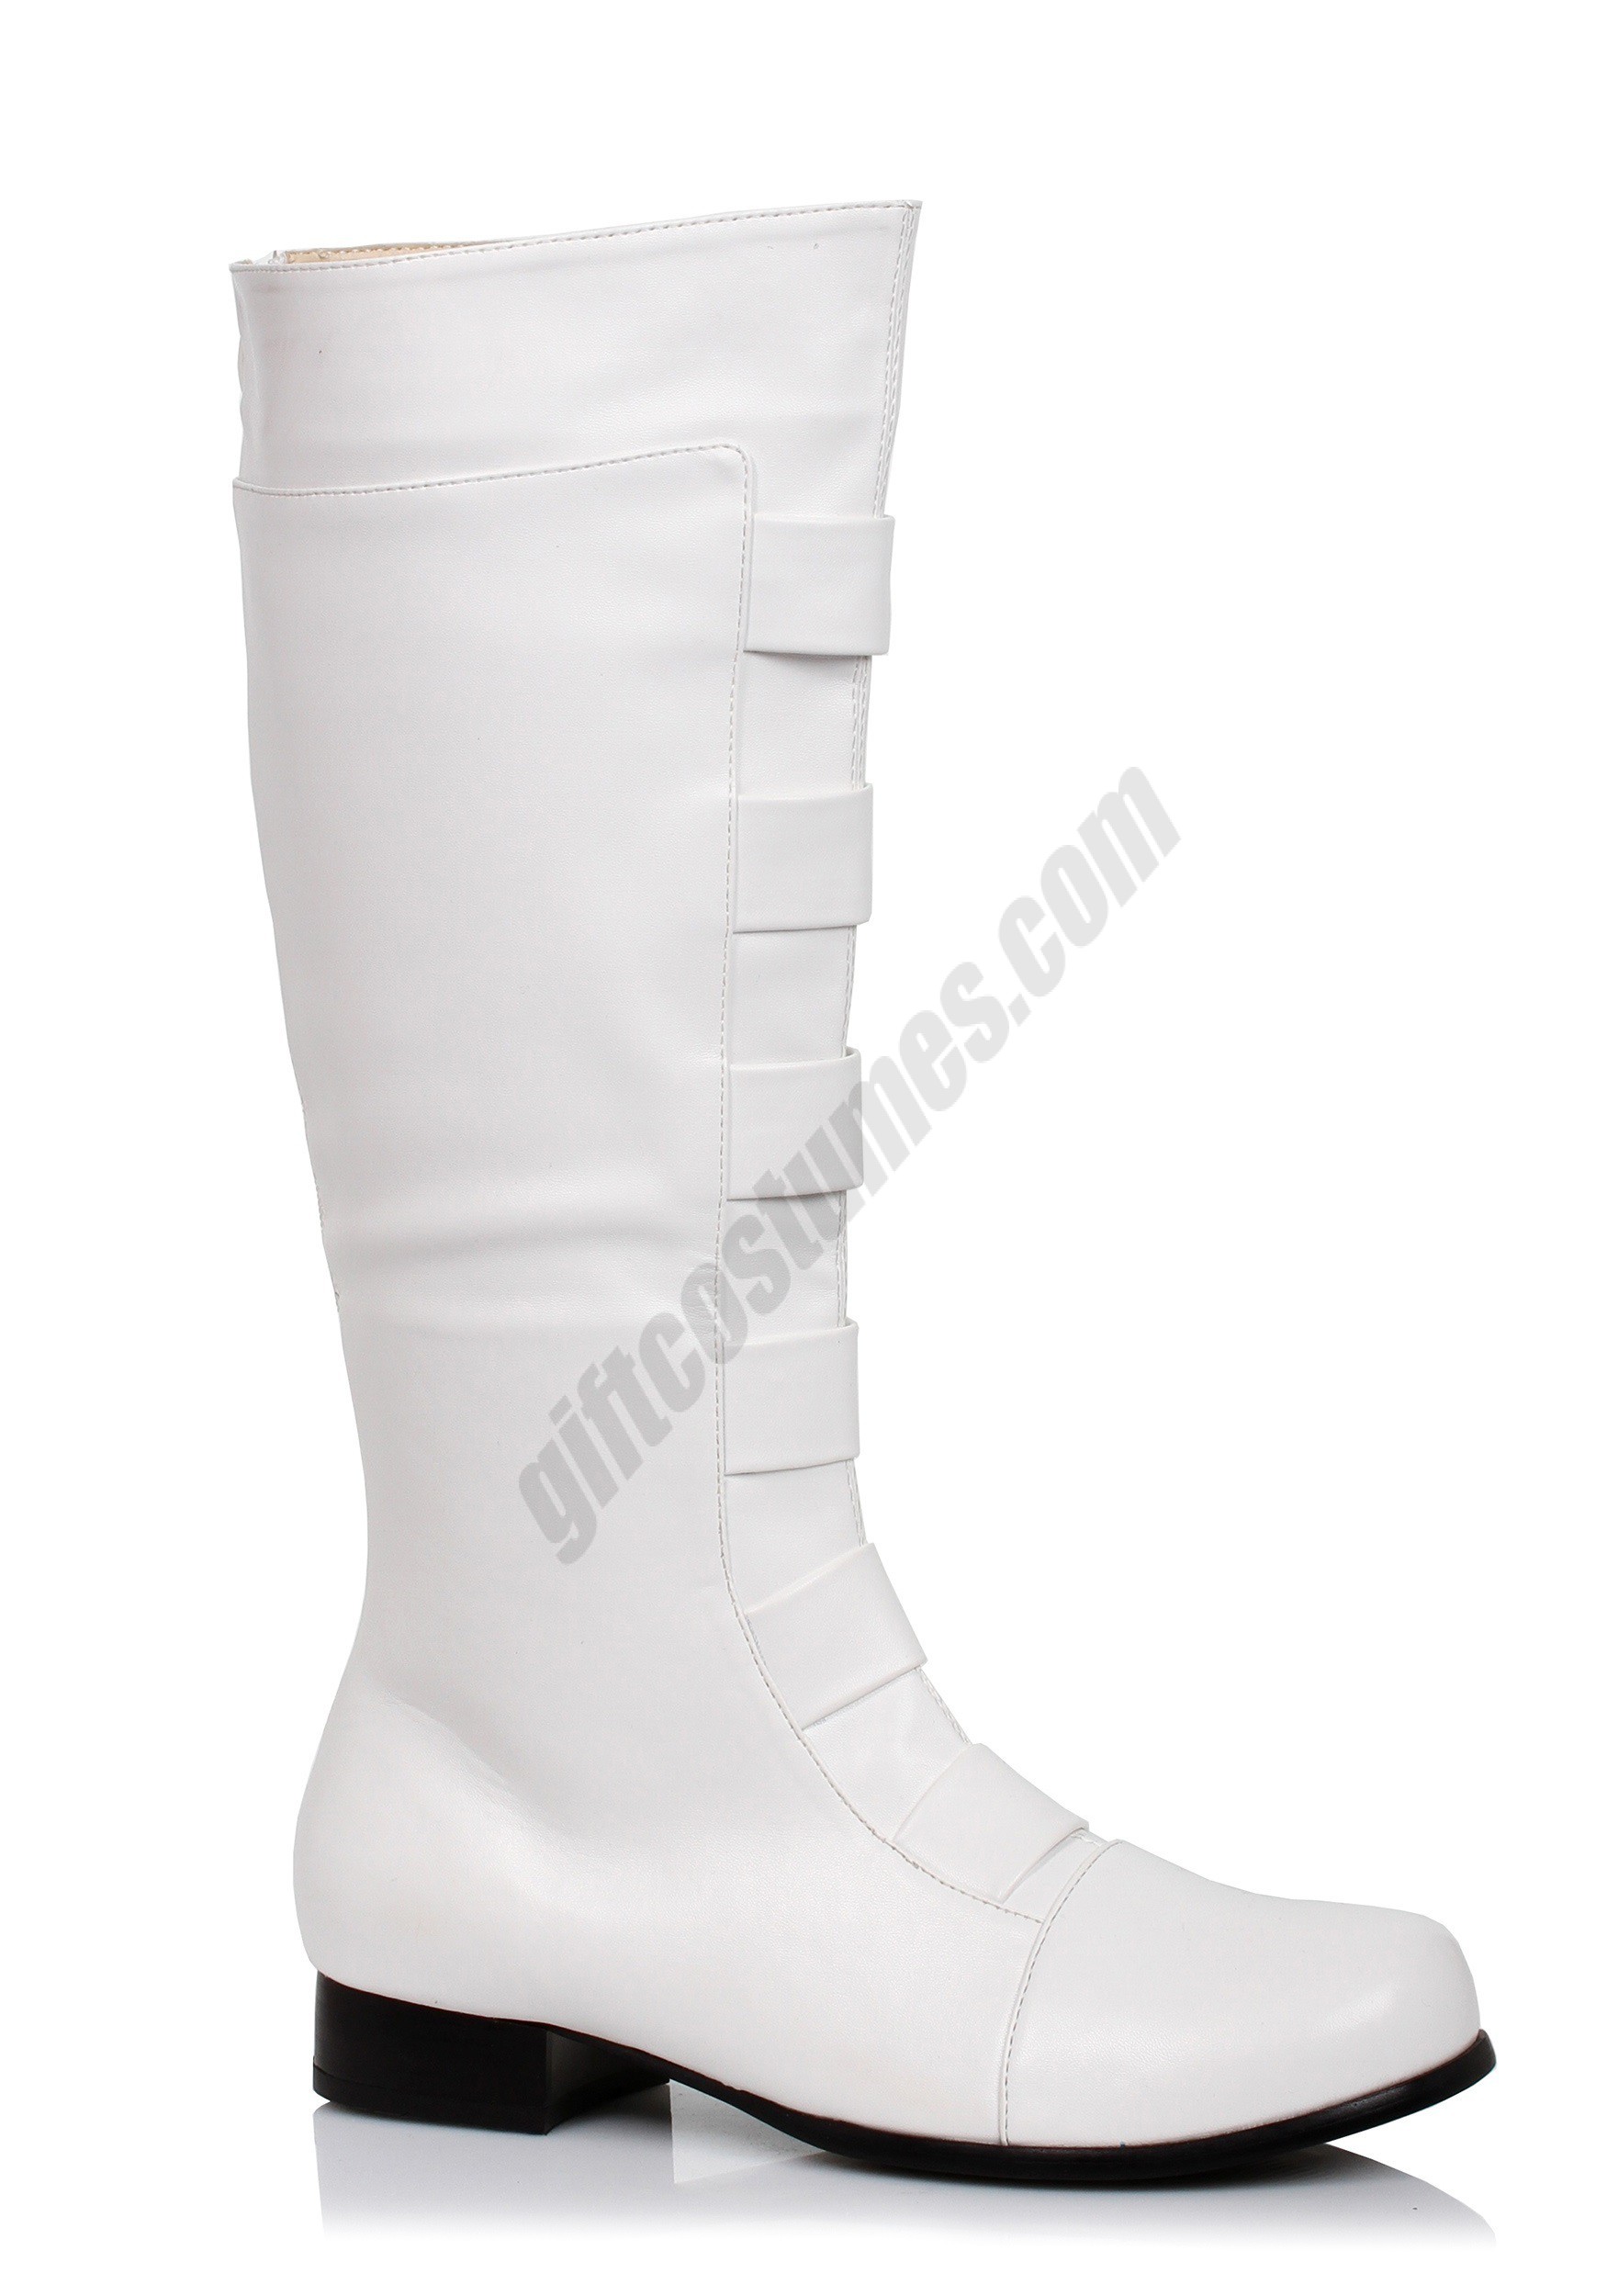 Adult White Superhero Boots Promotions - Adult White Superhero Boots Promotions